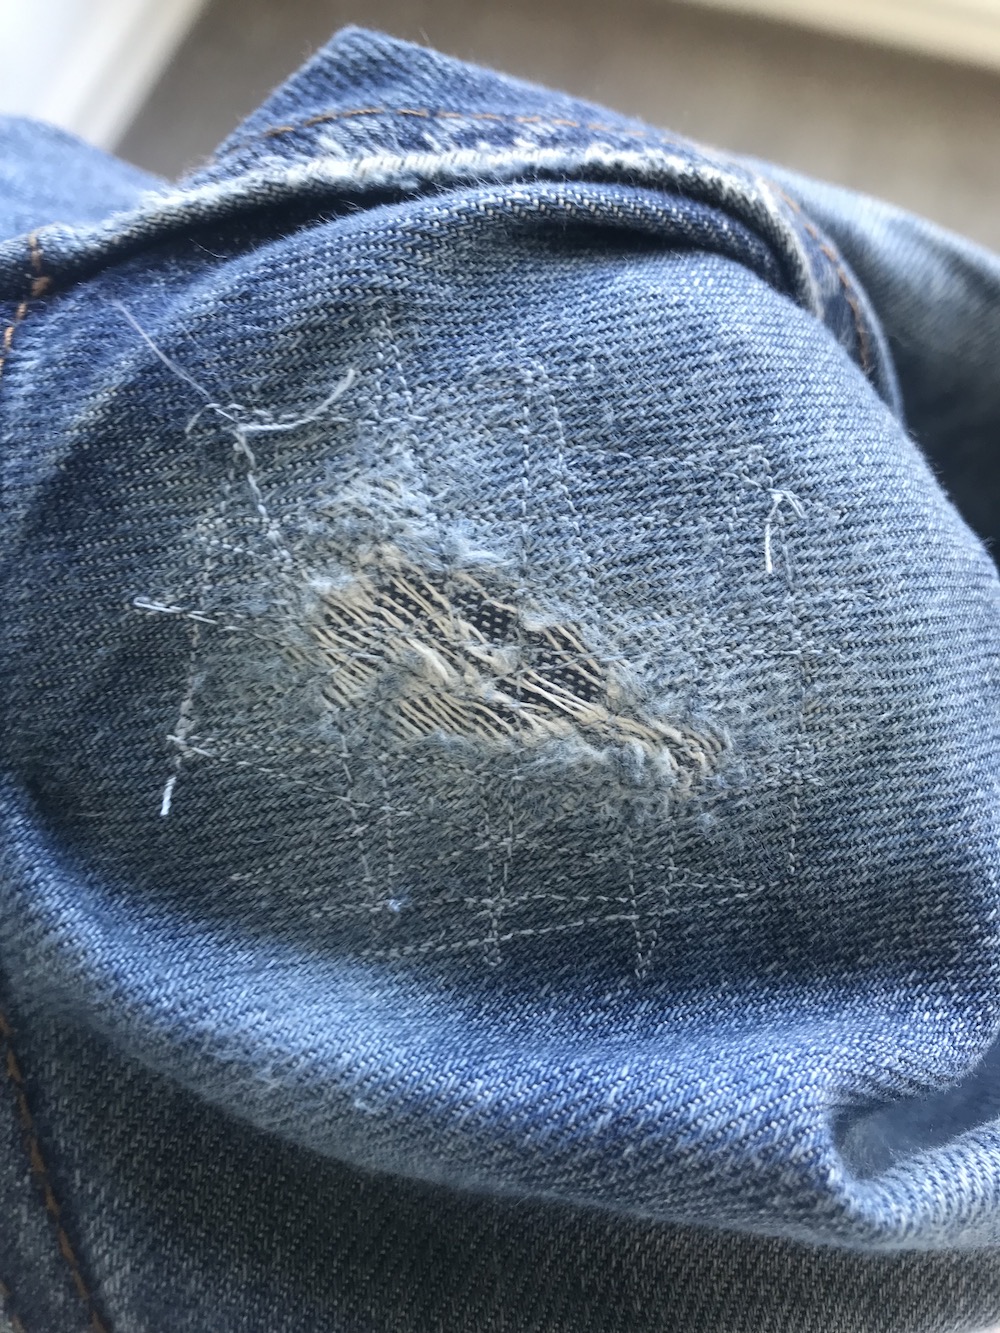 a patched hole in some jeans